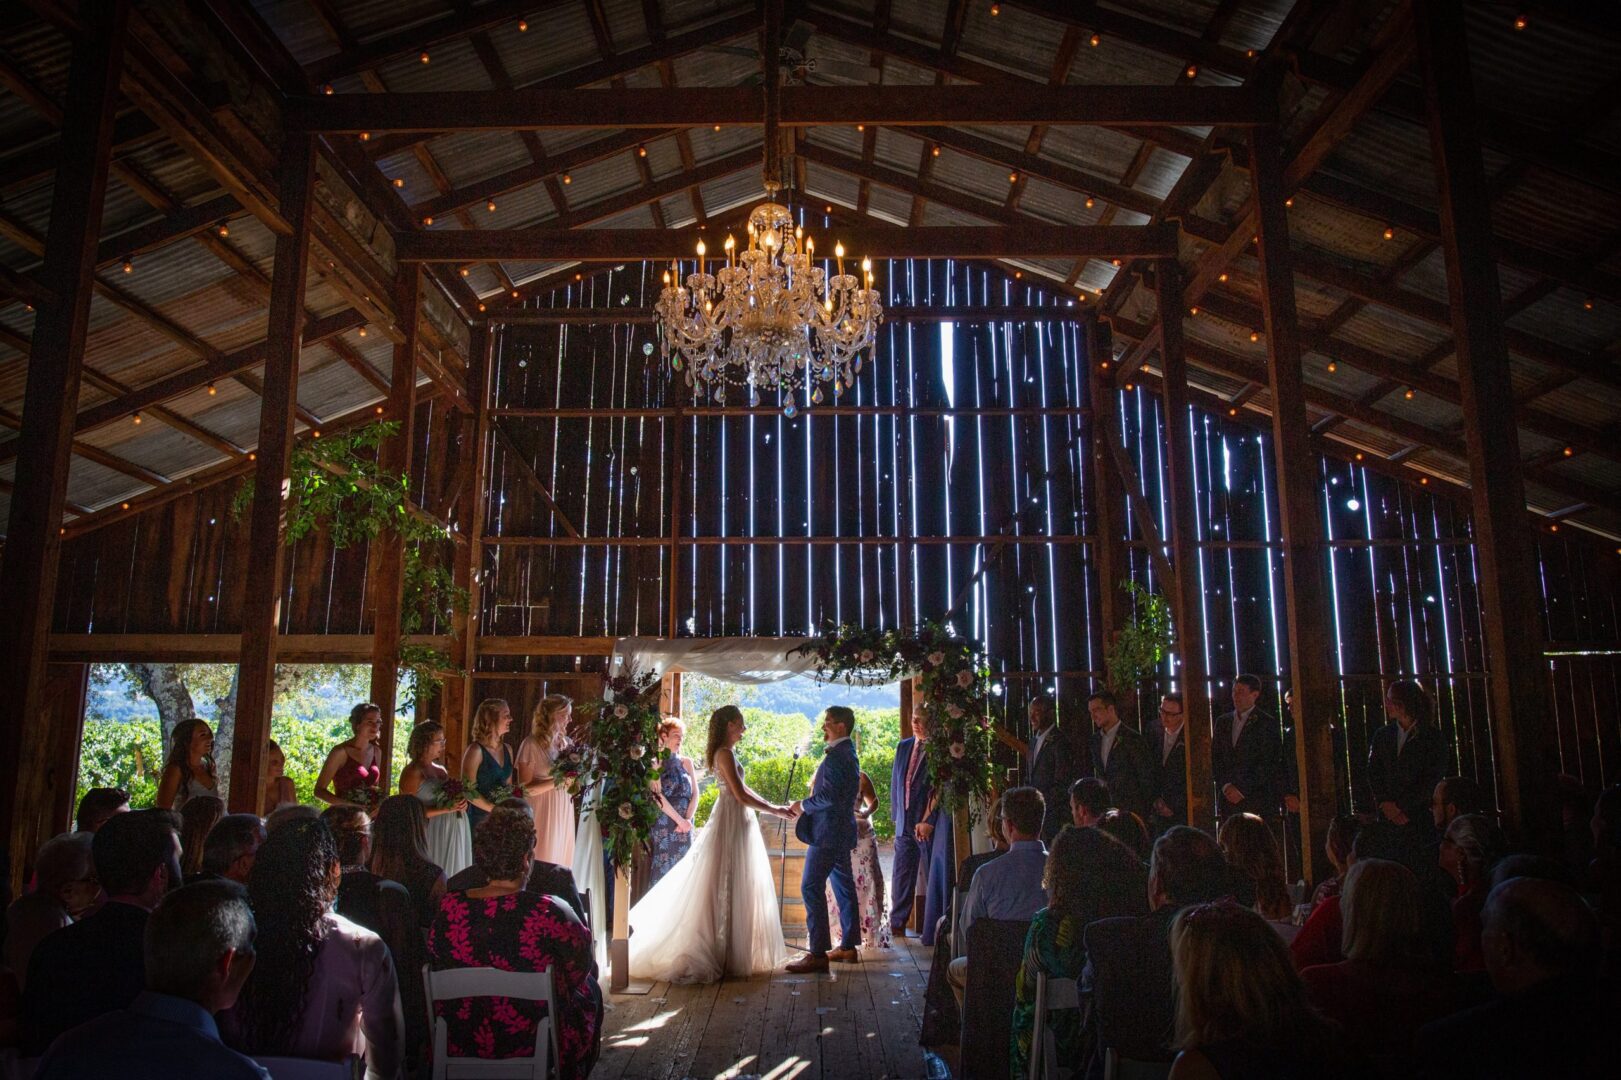 A wedding ceremony in a barn with a chandelier.